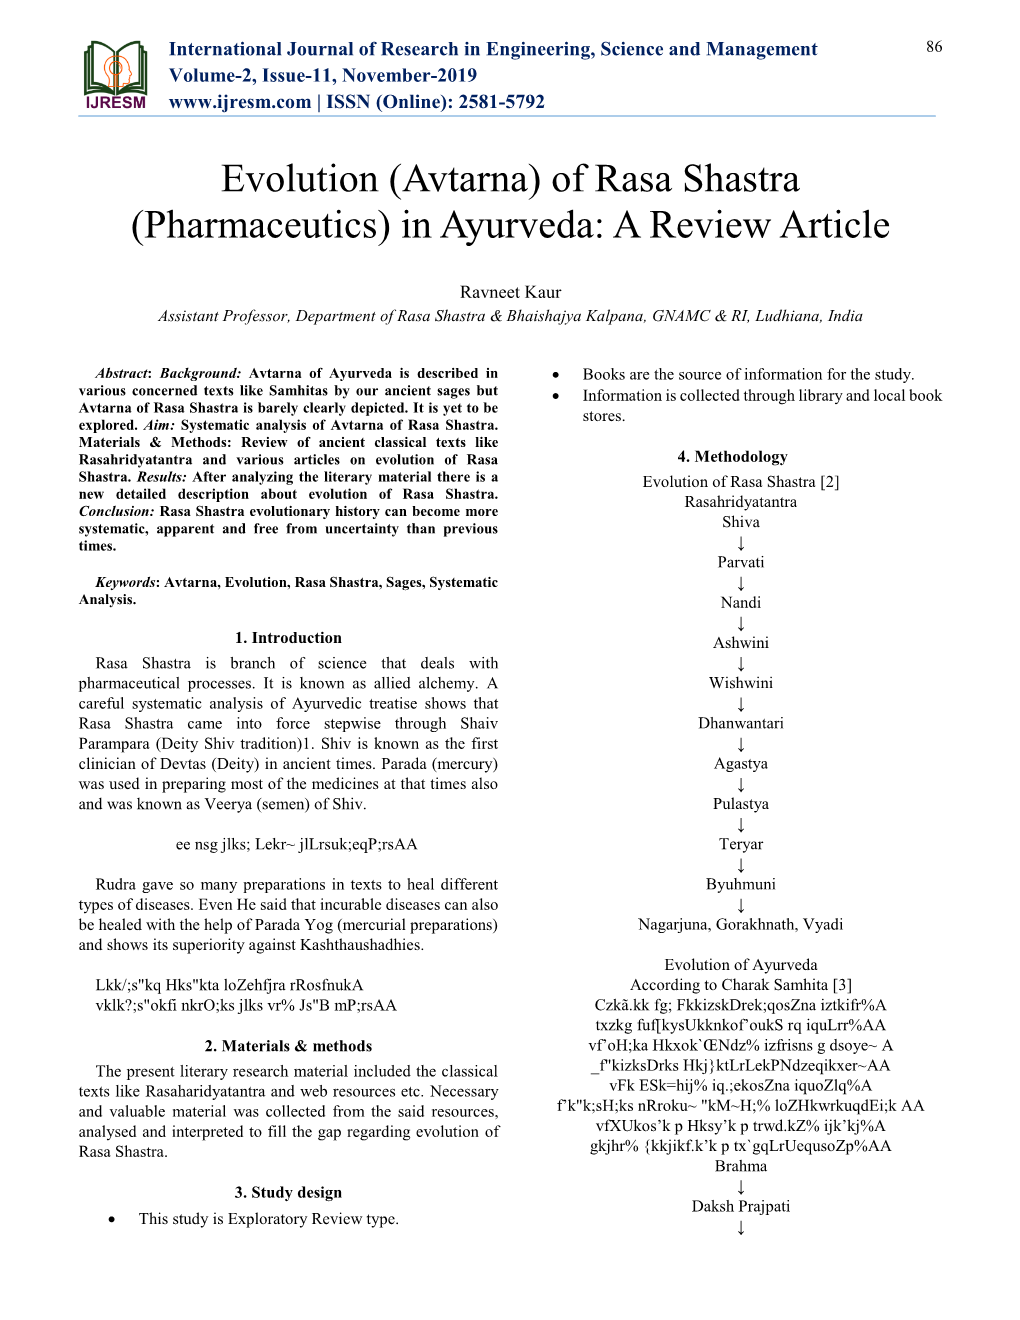 Of Rasa Shastra (Pharmaceutics) in Ayurveda: a Review Article